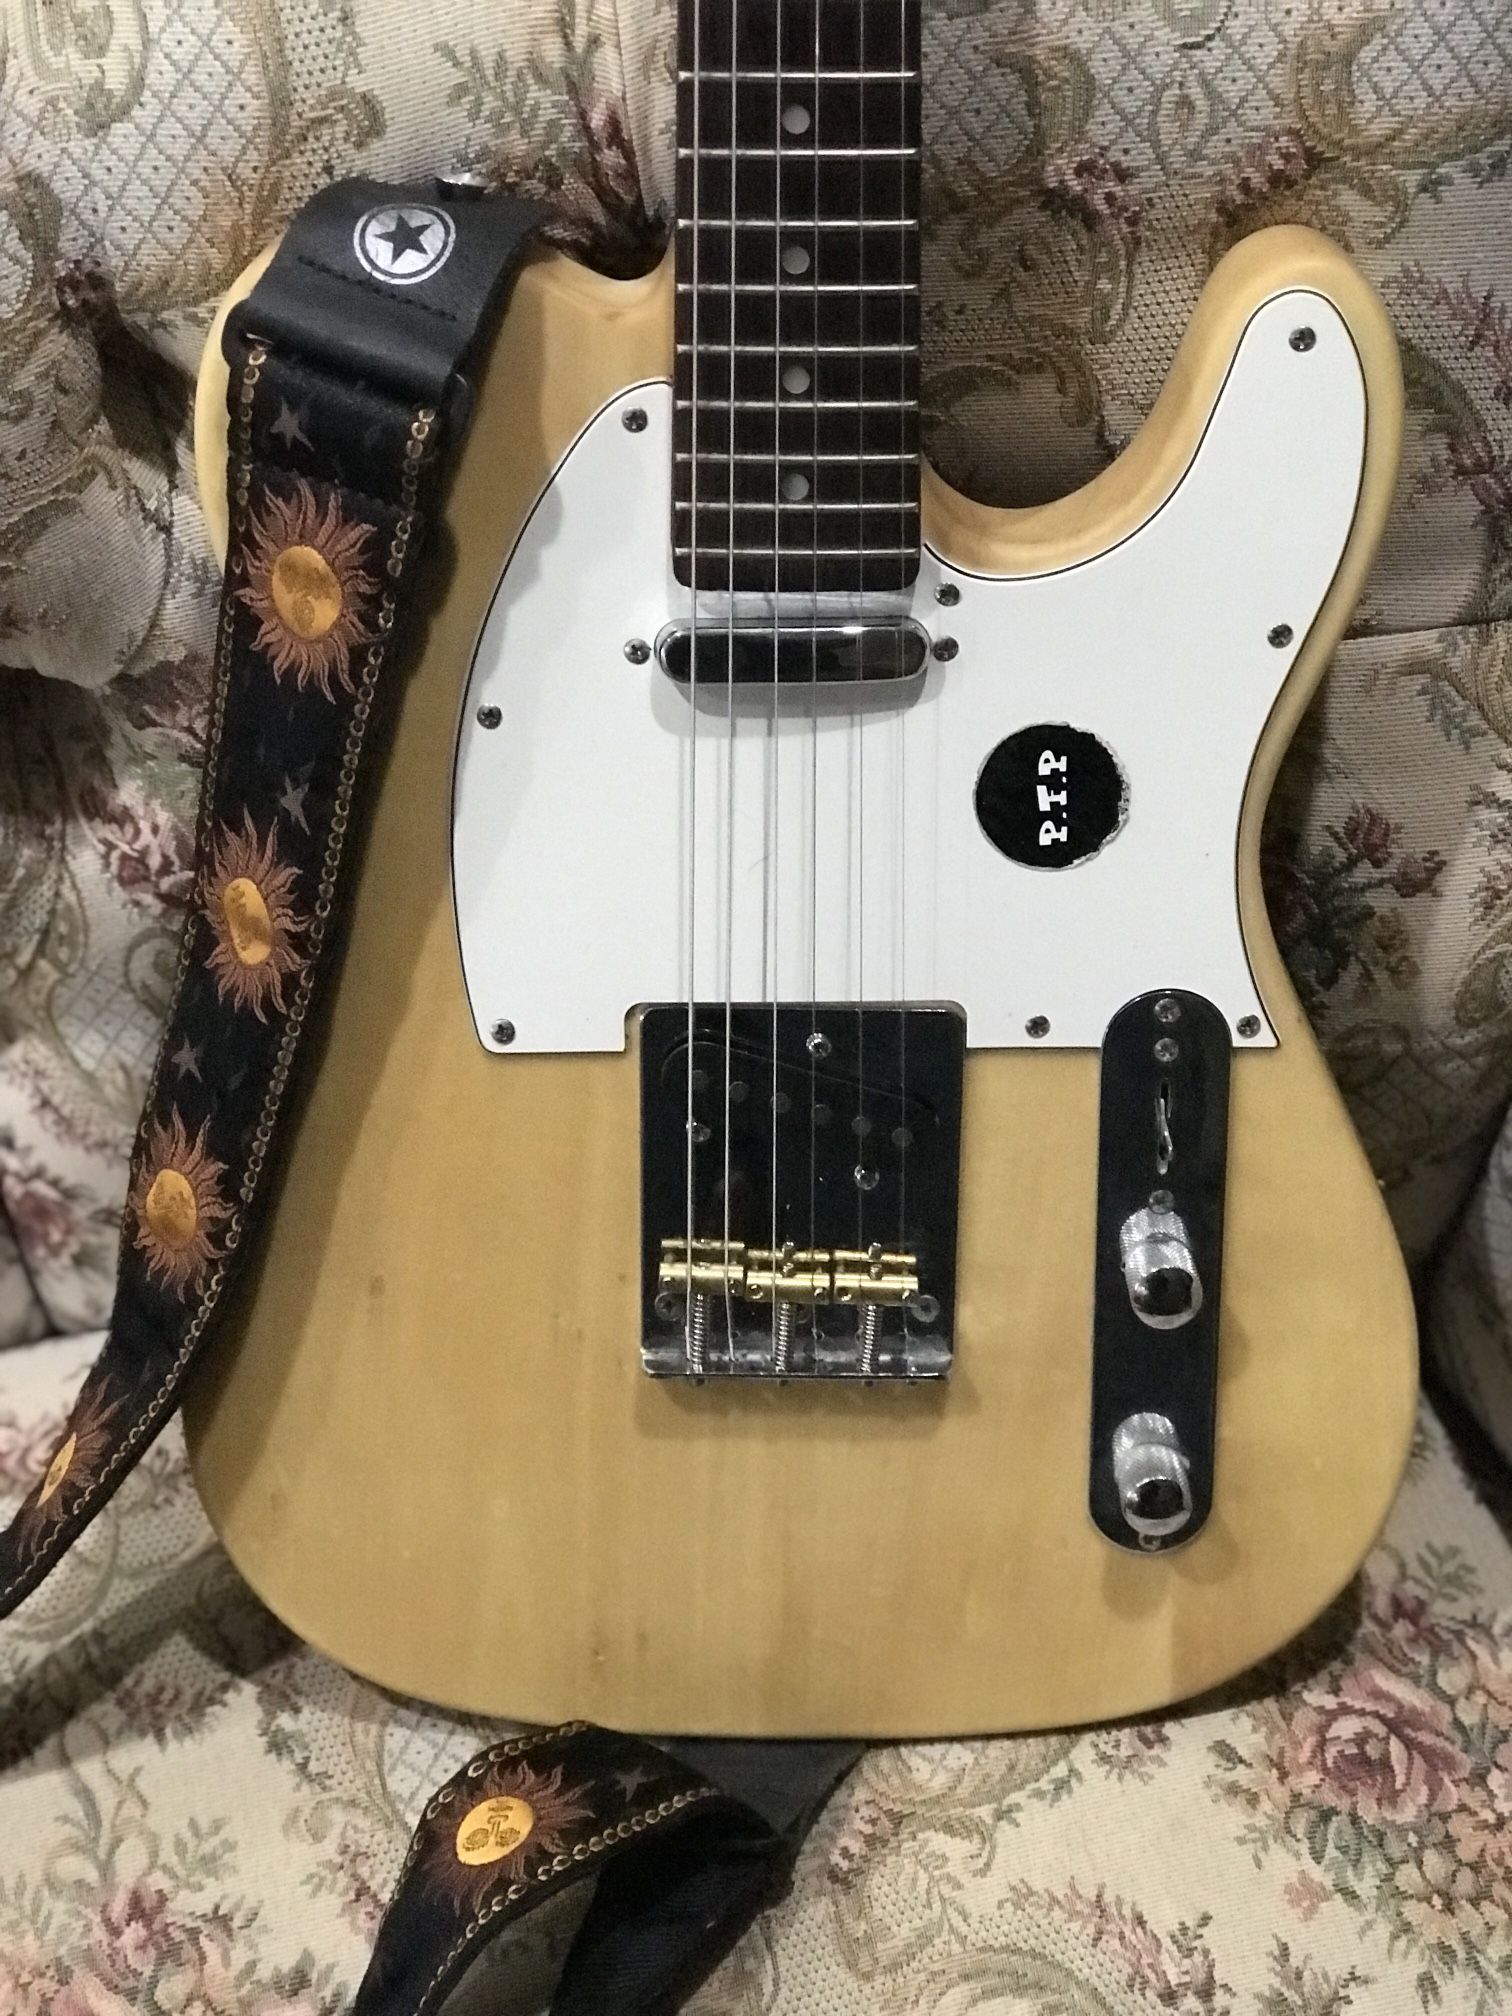 CUSTOM MADE TELECASTER STYLE GREAT SOUND LIKE A TELECASTER , CAN STILL BE UPGRADED AND MESSED WITH